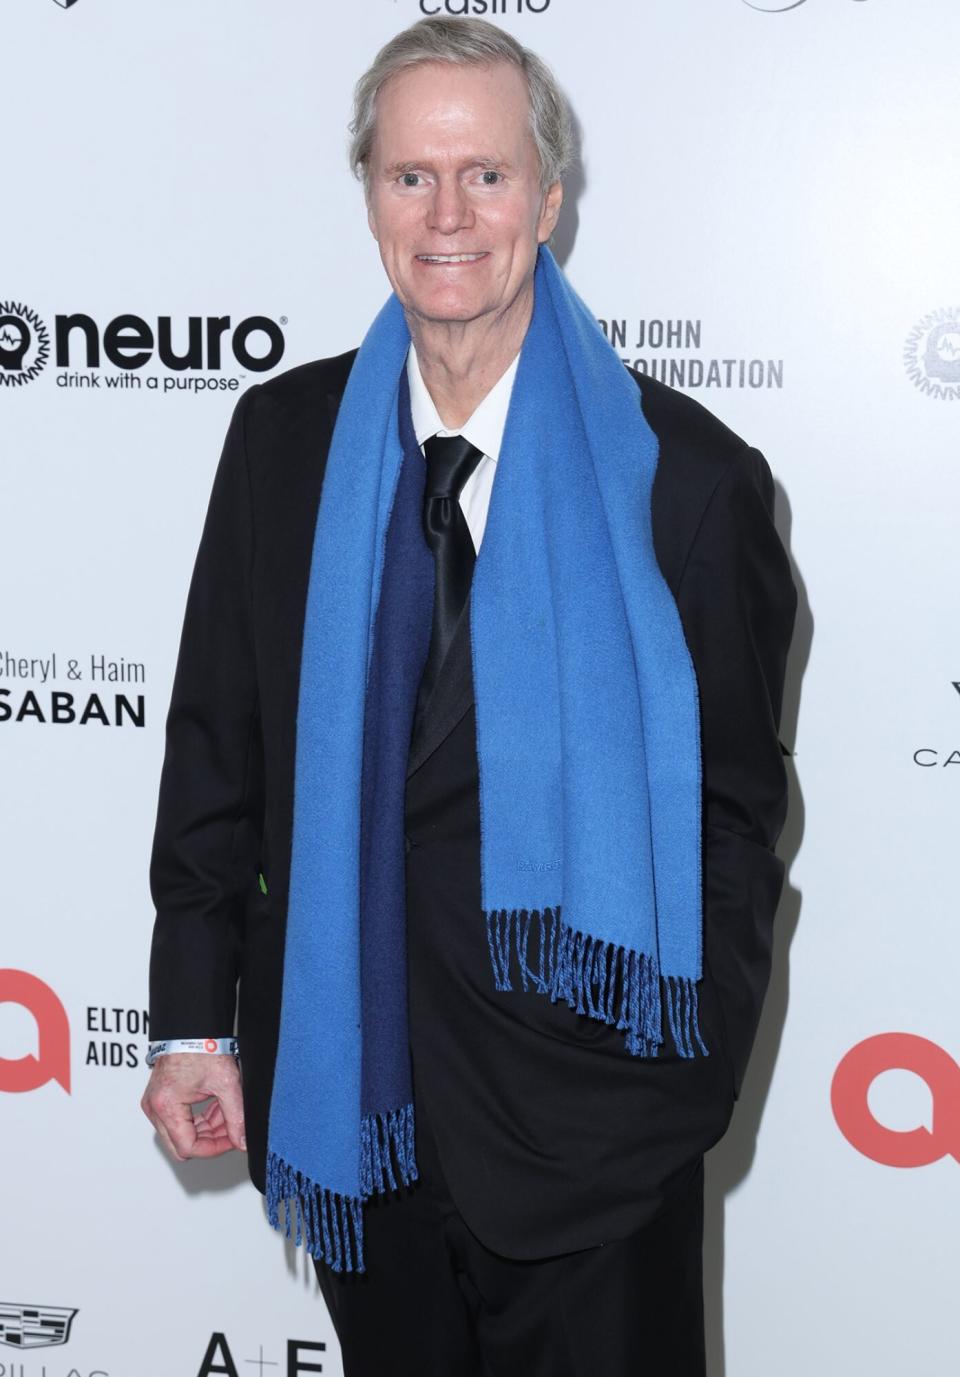 Richard Hilton attends Elton John AIDS Foundation's 31st annual academy awards viewing party